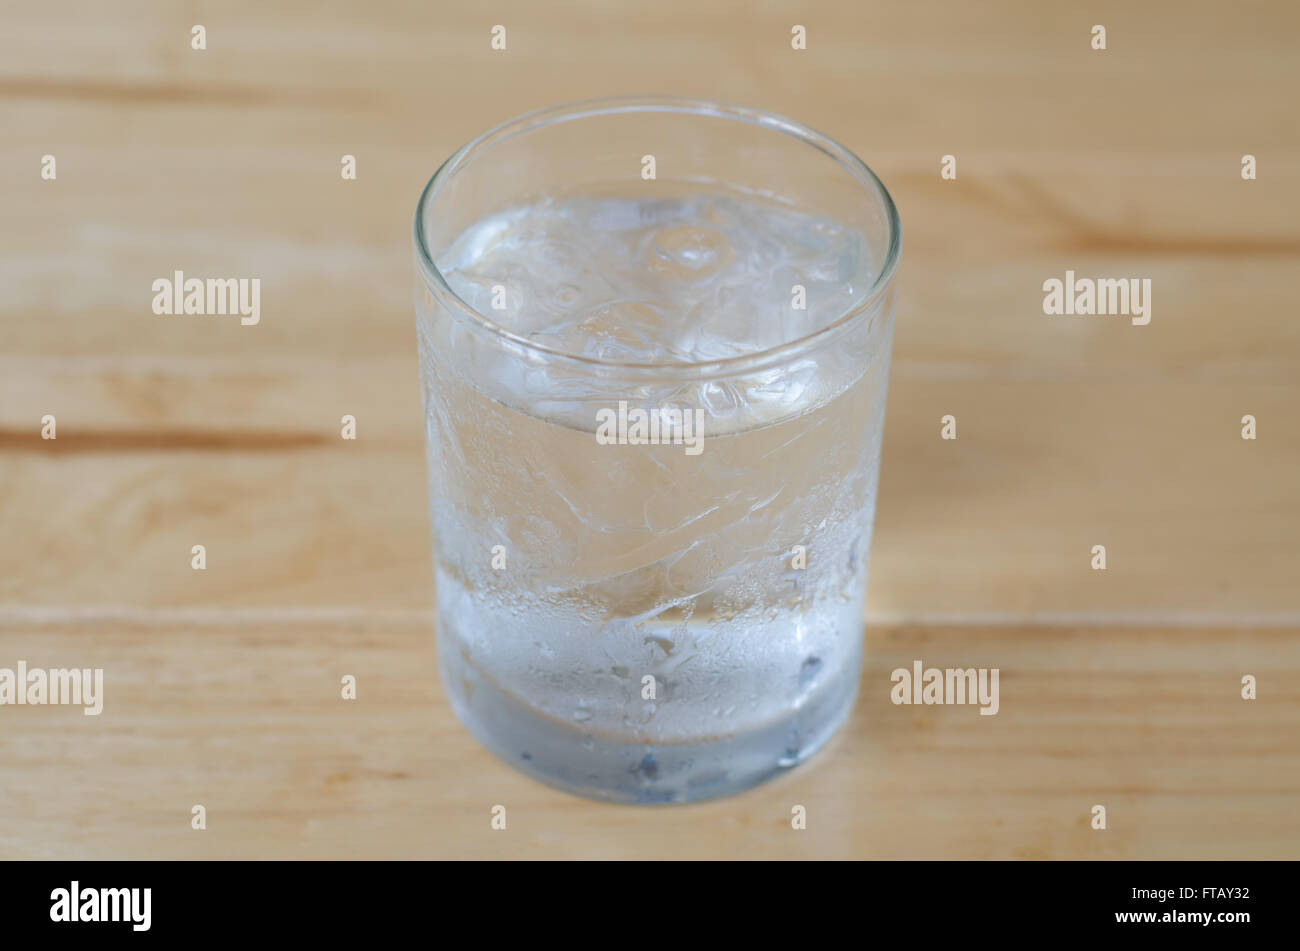 glass of water with ice on wooden table Stock Photo